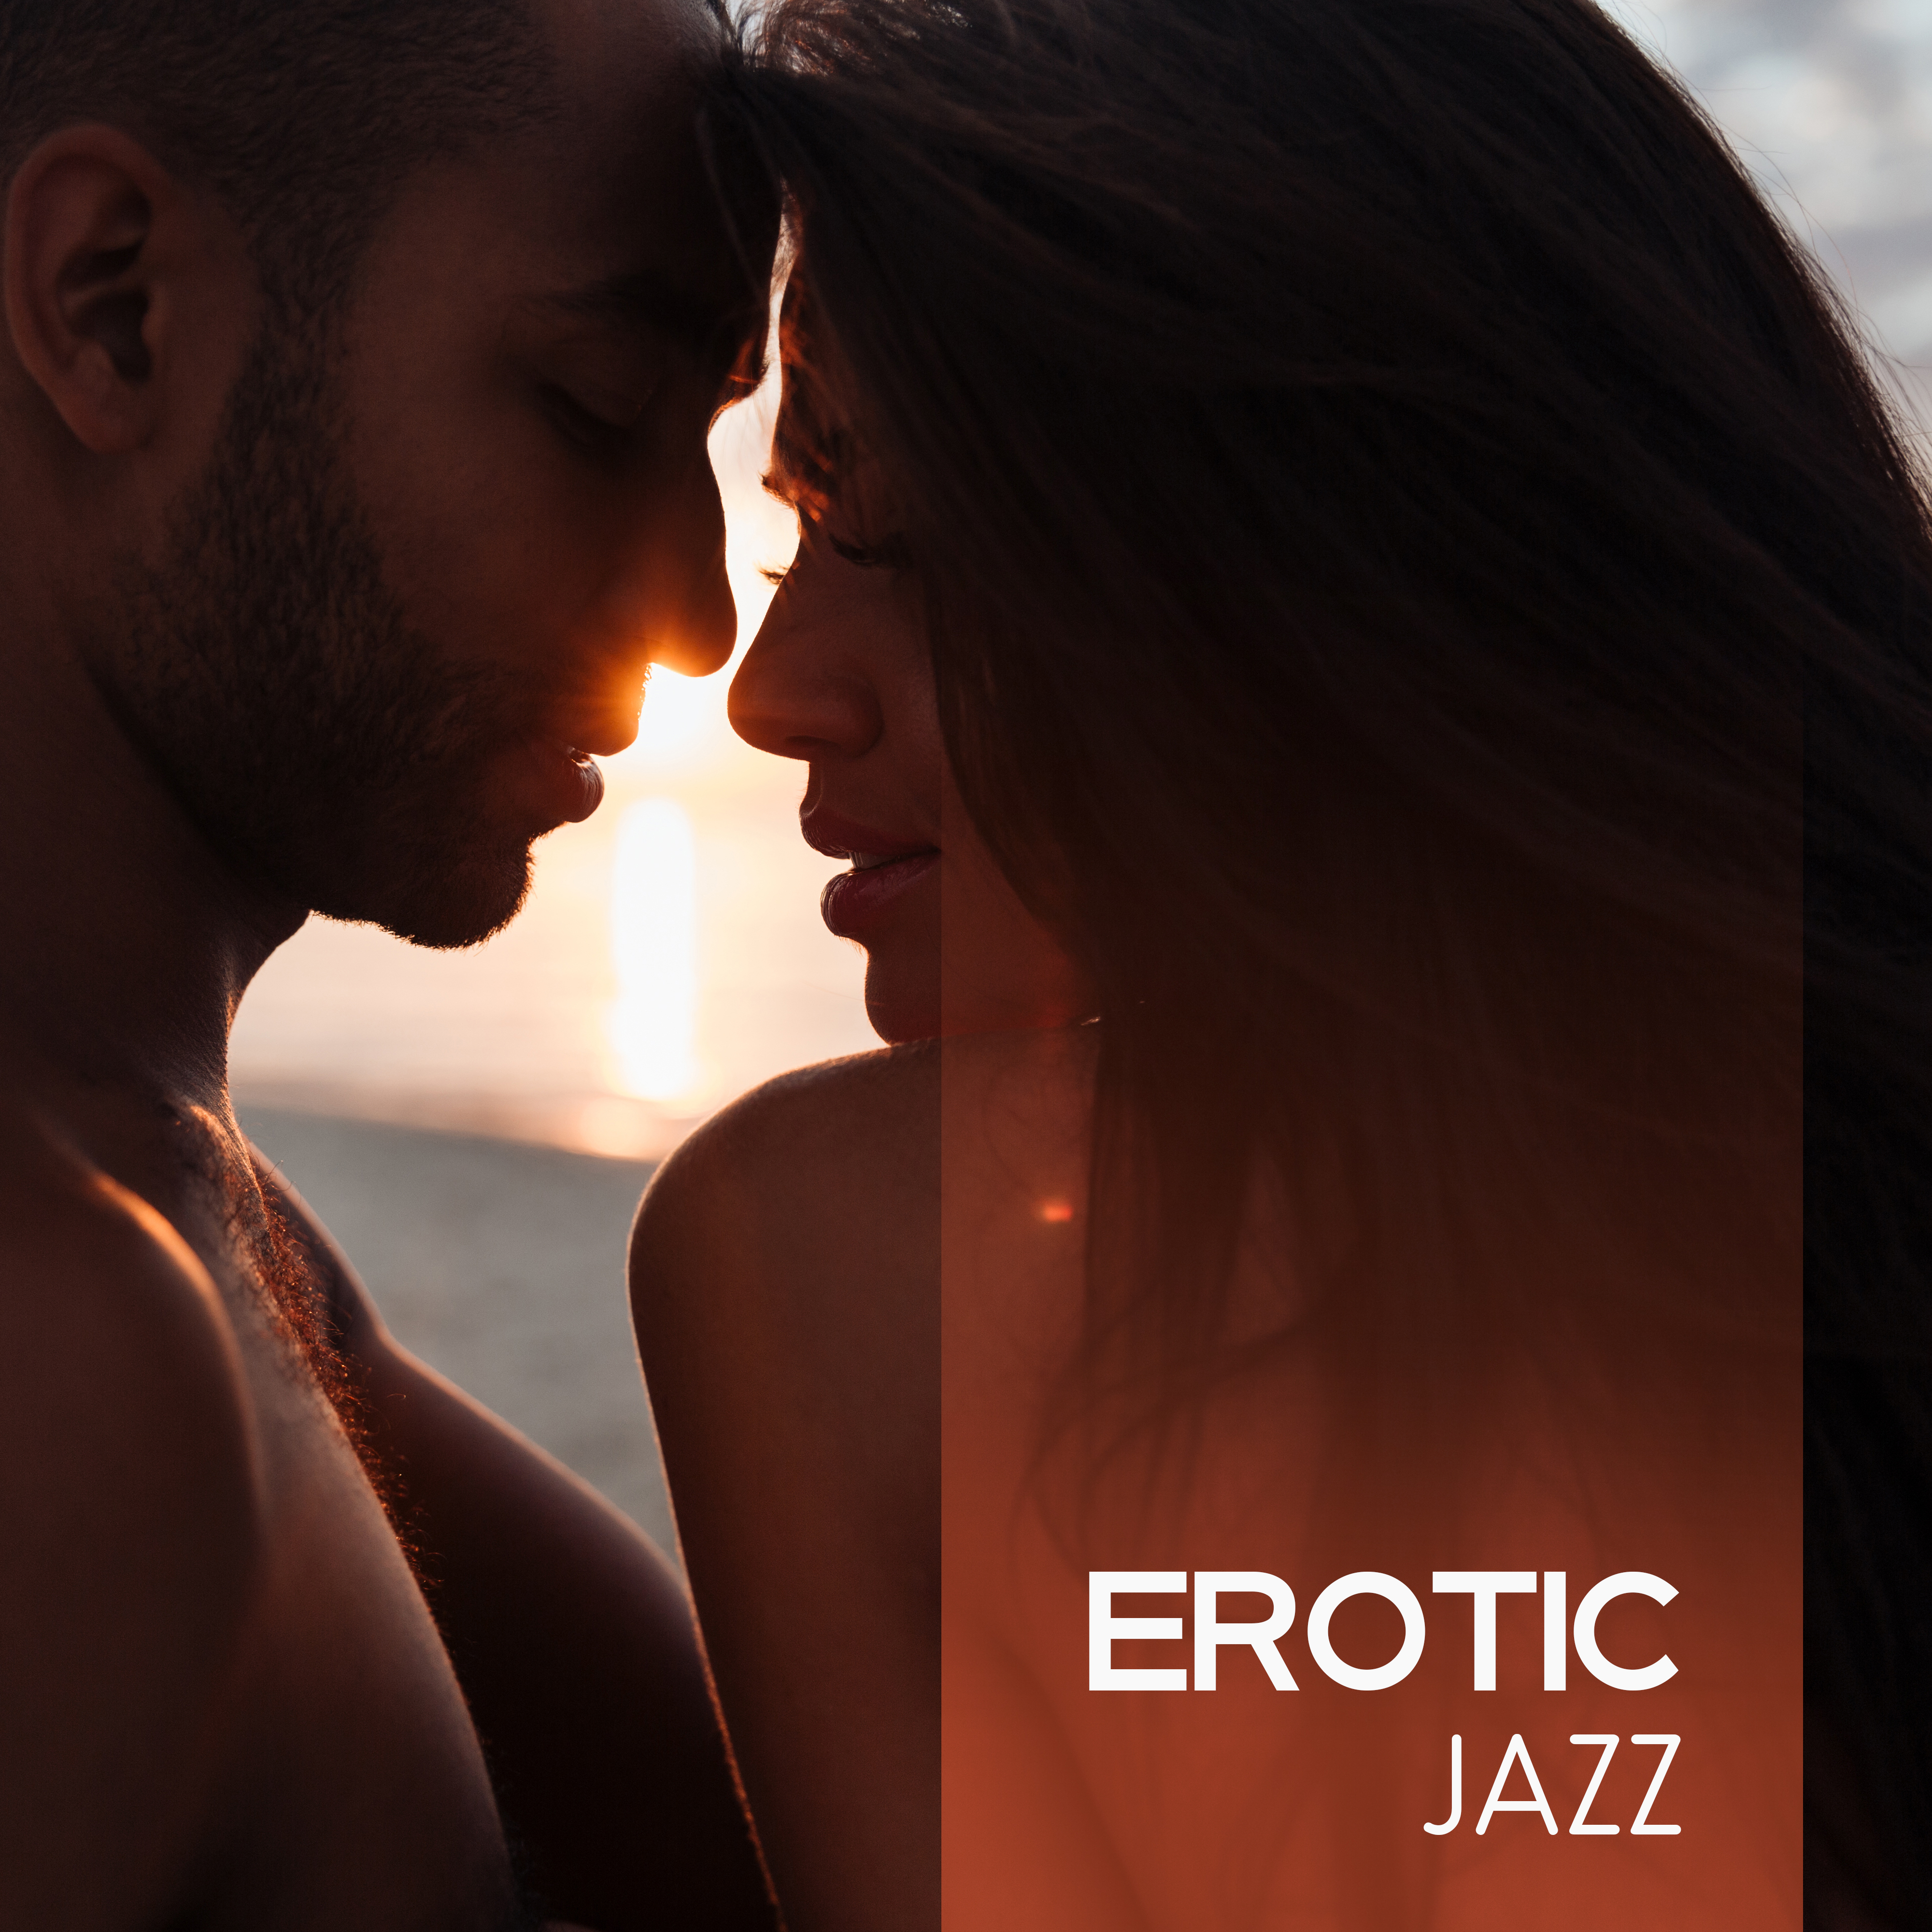 Erotic Jazz – Sensual Music, Pure Relaxation for Two, Hot Massage, Erotic Dance, Sensual Saxophone, True Love, **** Dance, Smooth Jazz